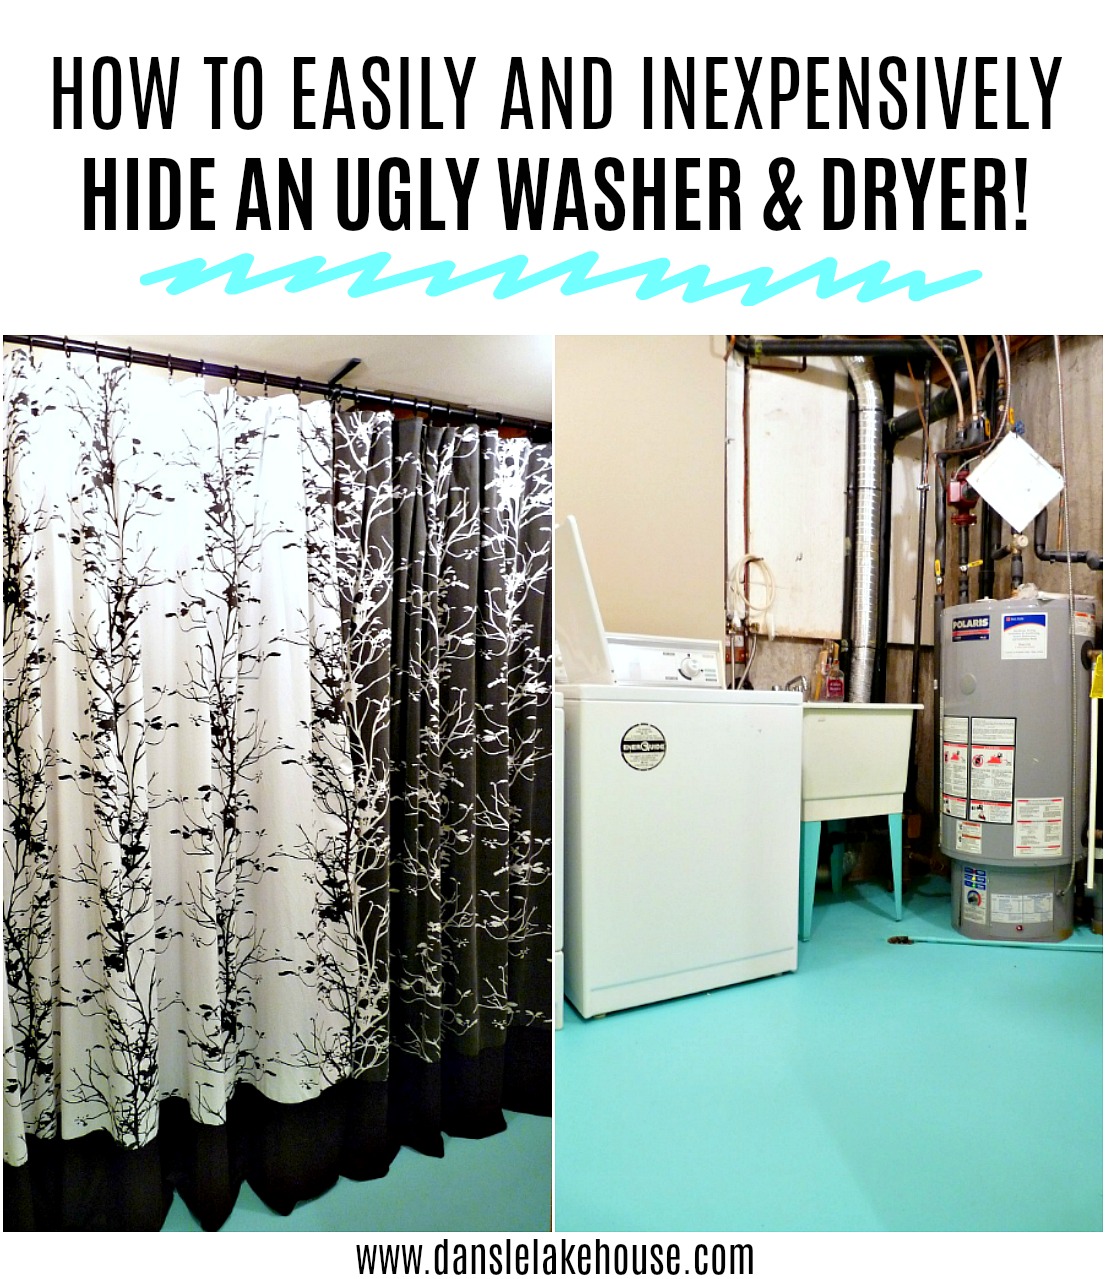 How to Hide an Ugly Washer and Dryer with an Upcyled Curtain. Budget-Friendly Laundry Room Makeover Idea! #laundroom #upcycle #savingmoney #budgethomedecor